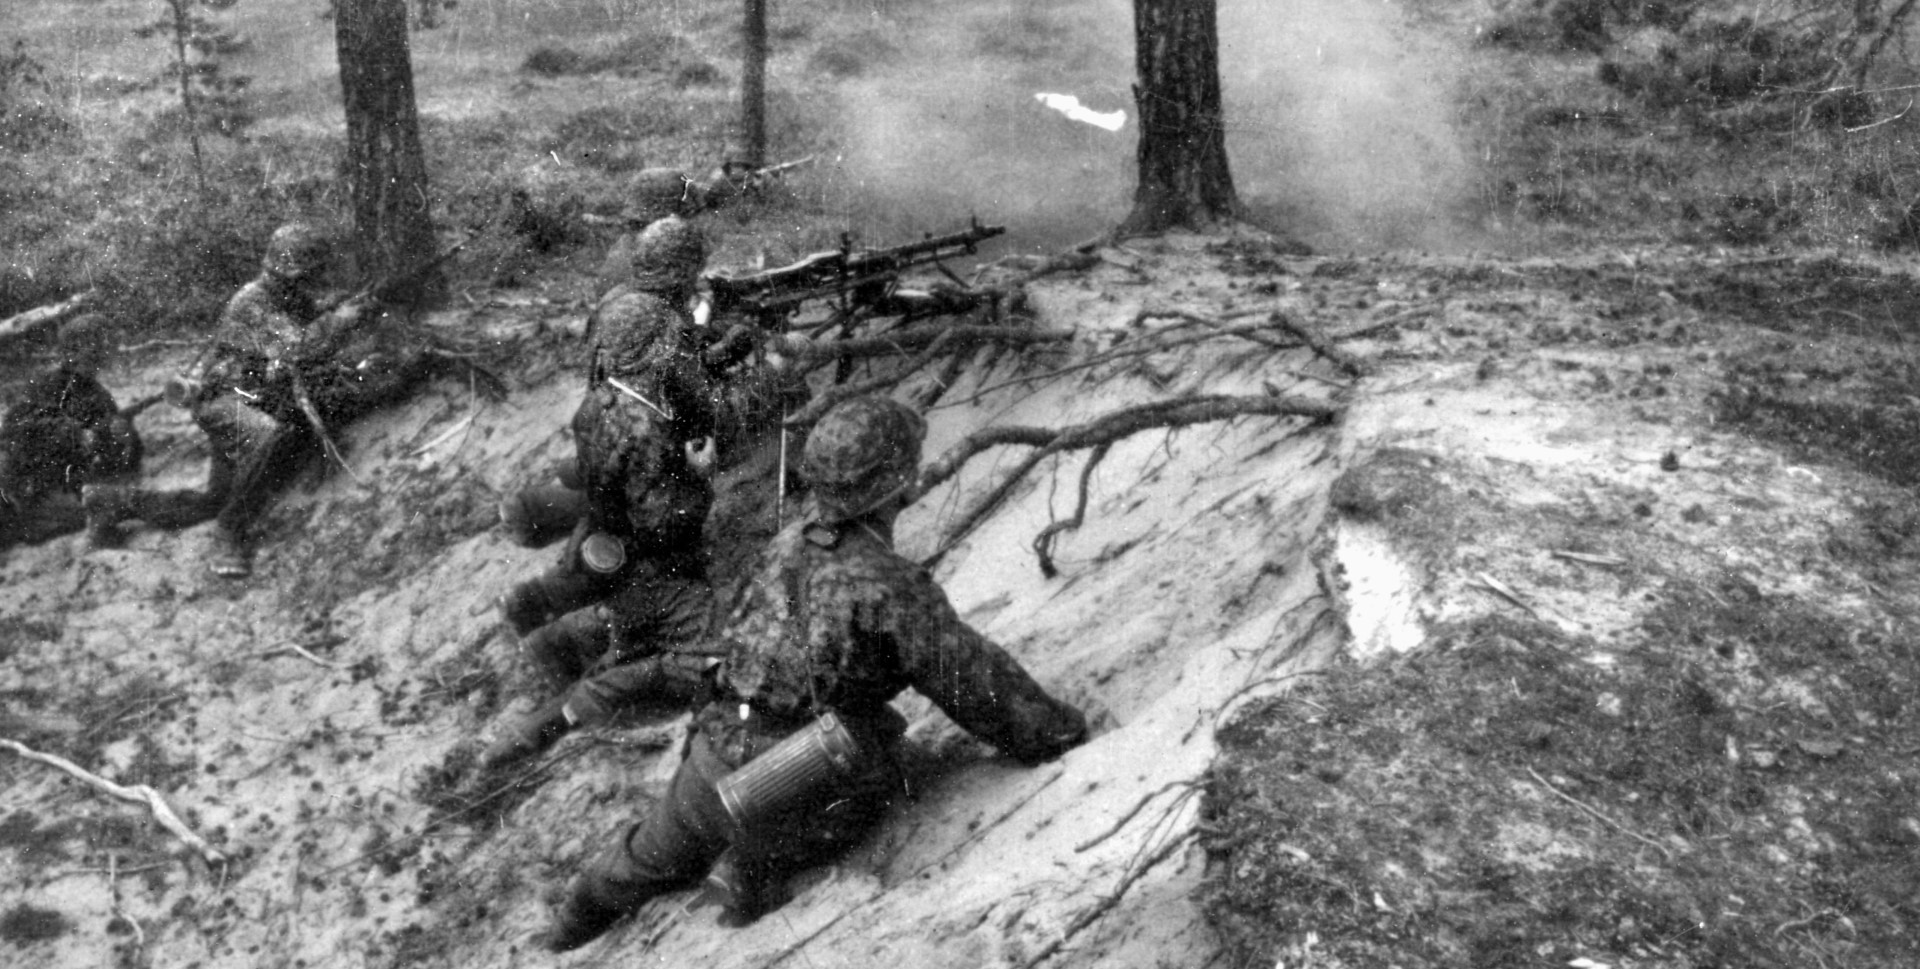 Wispy smoke rises from the barrel of a German machine gun during a heated engagement with Soviet troops near Leningrad. These are Waffen SS soldiers, highly motivated and often fanatical in their Nazi loyalties.